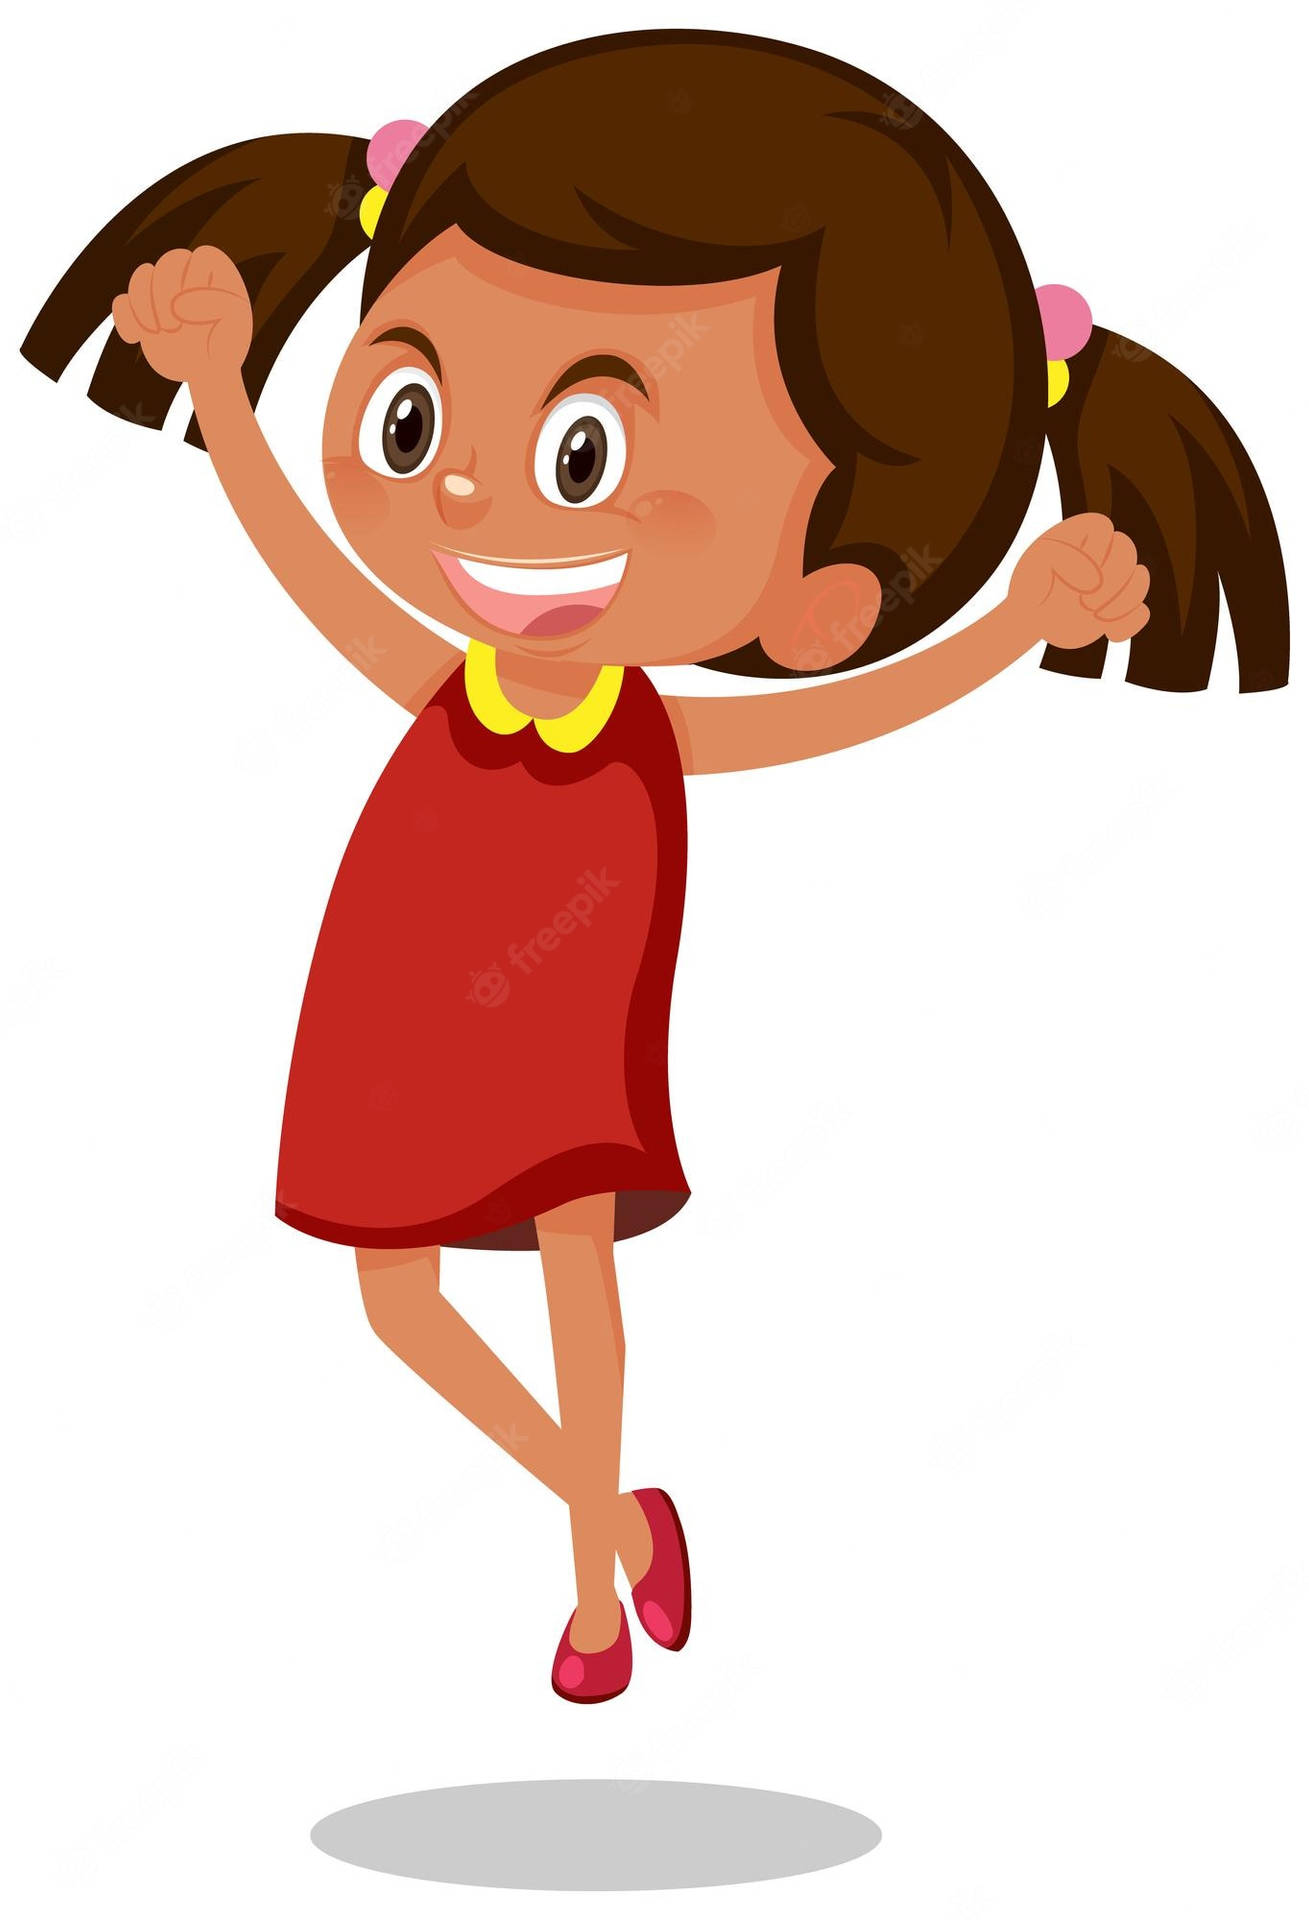 Excited Child With Hands Raised Wallpaper